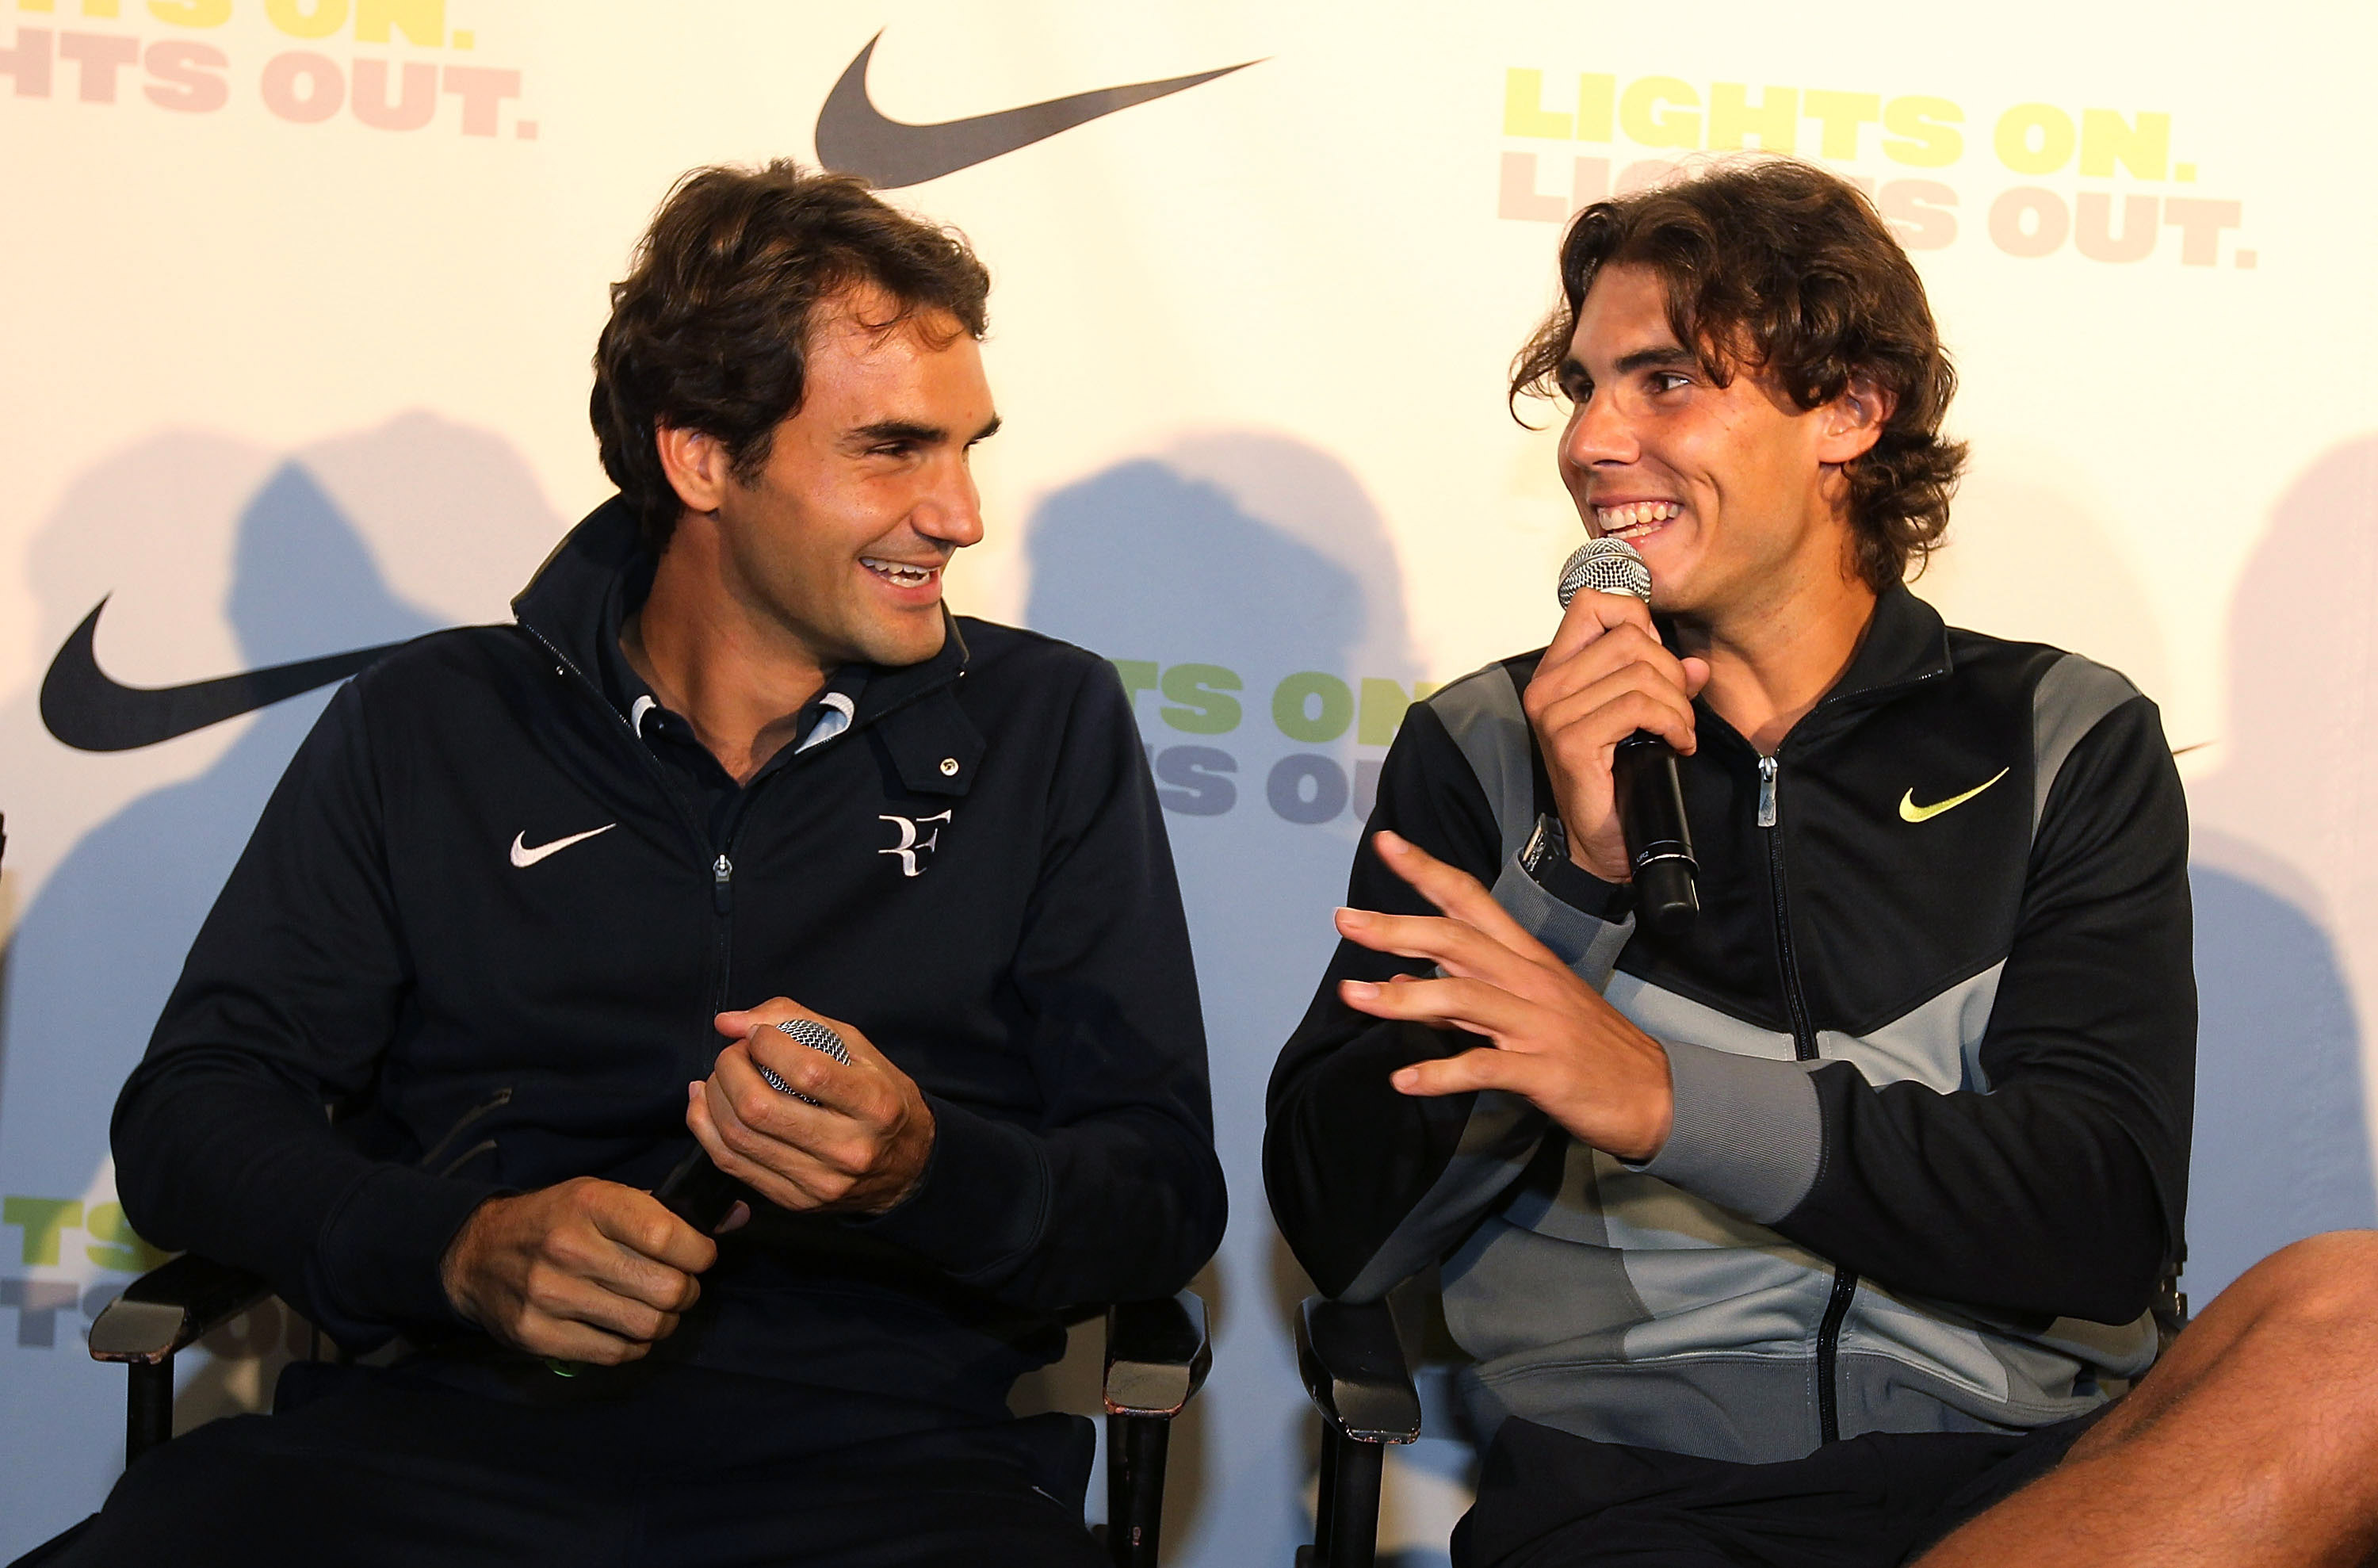 NEW YORK - AUGUST 25:  Roger Federe and Rafael Nadal appear at a press conference following The Nike Primetime Knockout Tennis Event at Pier 54 on August 25, 2010 in New York City.  (Photo By Al Bello/Getty Images for Nike)